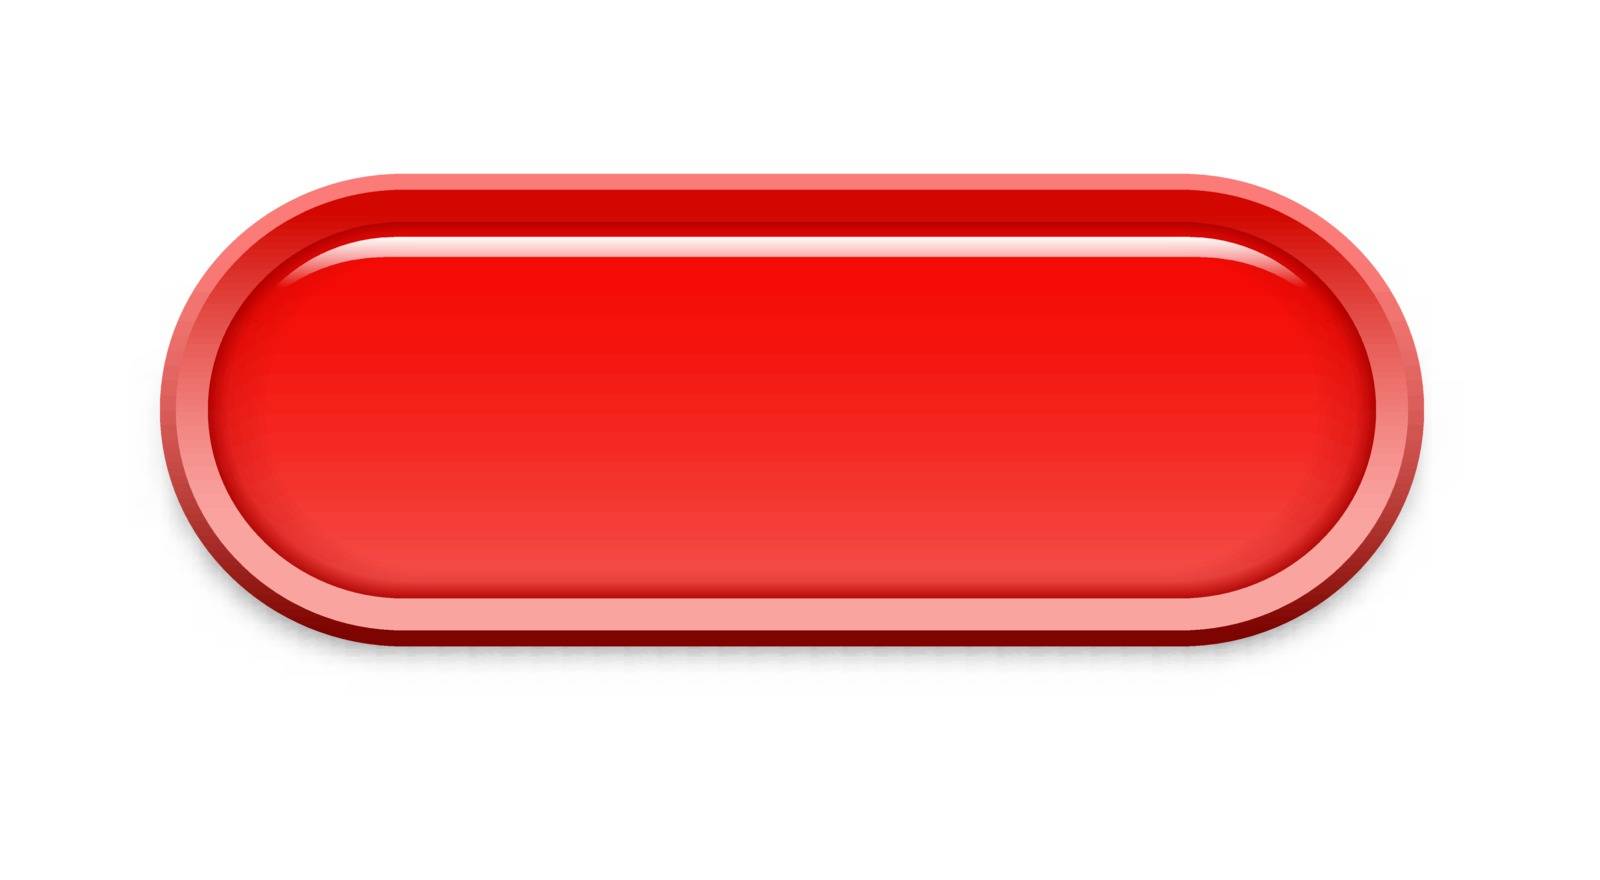 the red blank button